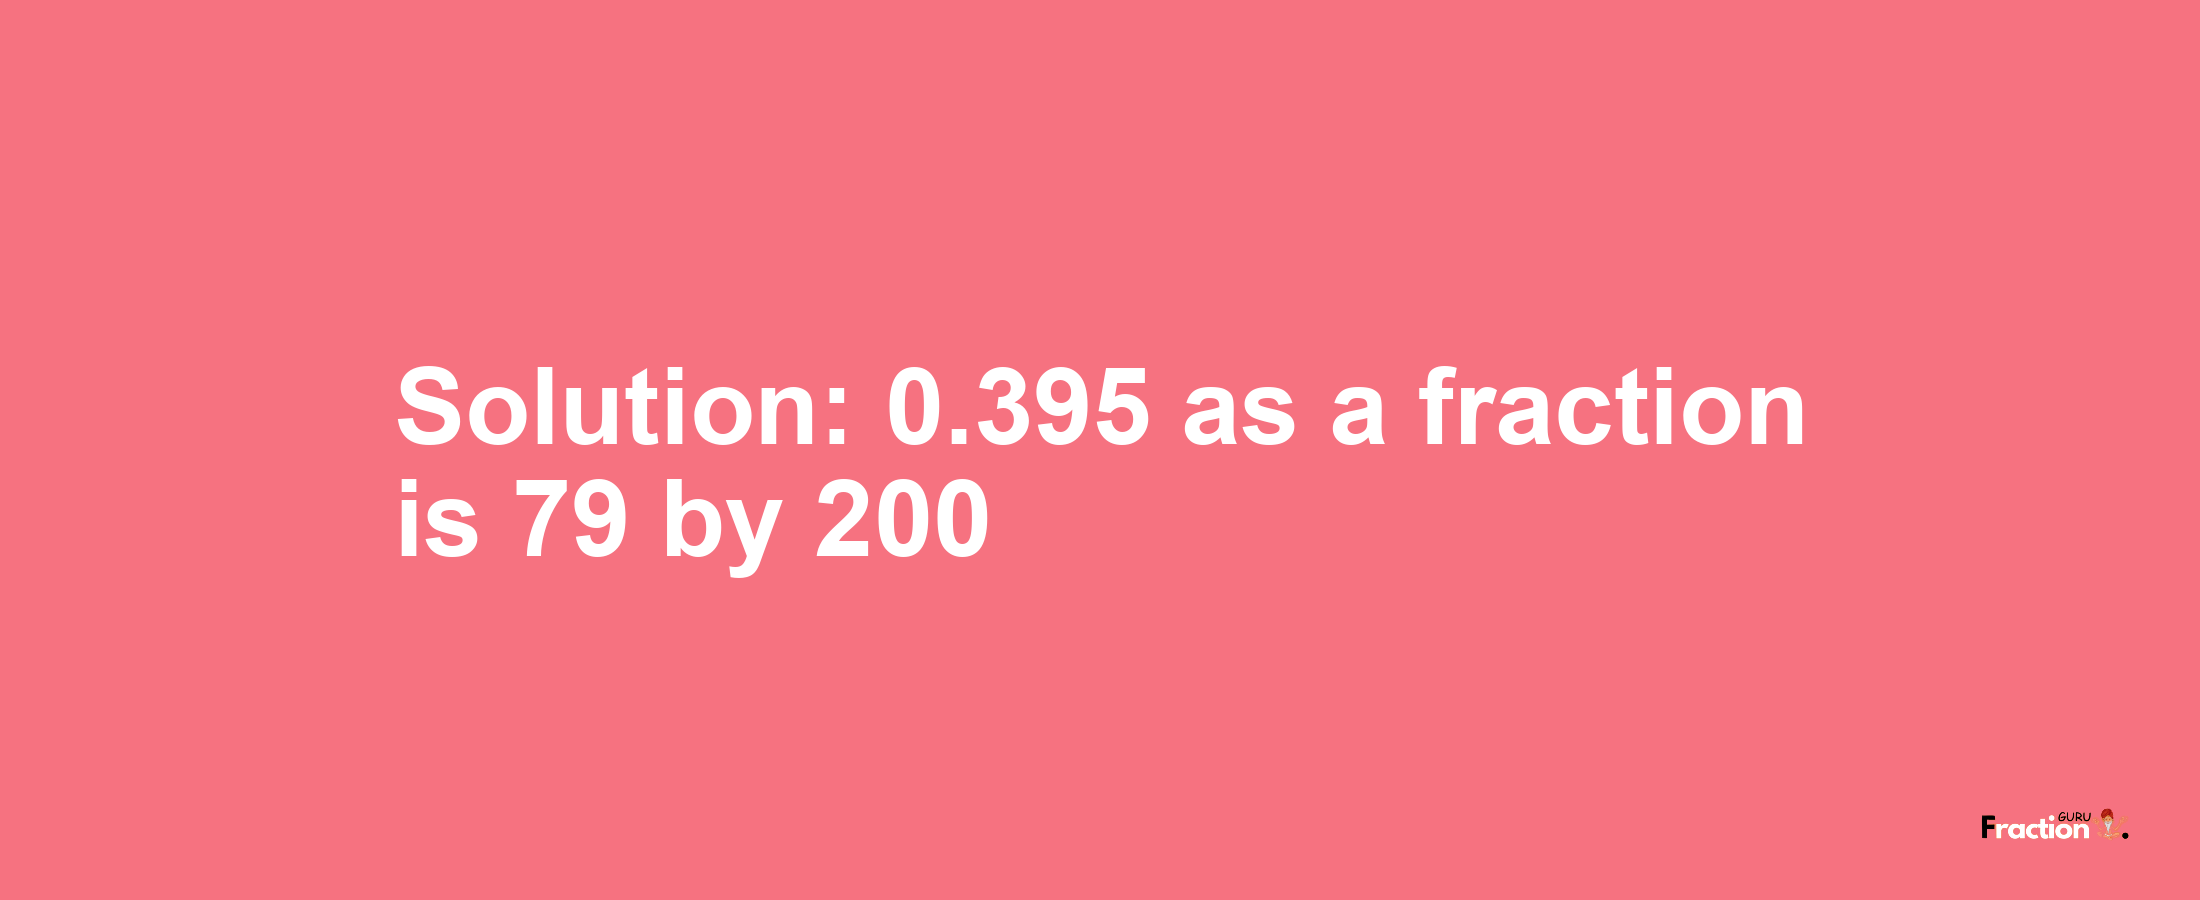 Solution:0.395 as a fraction is 79/200